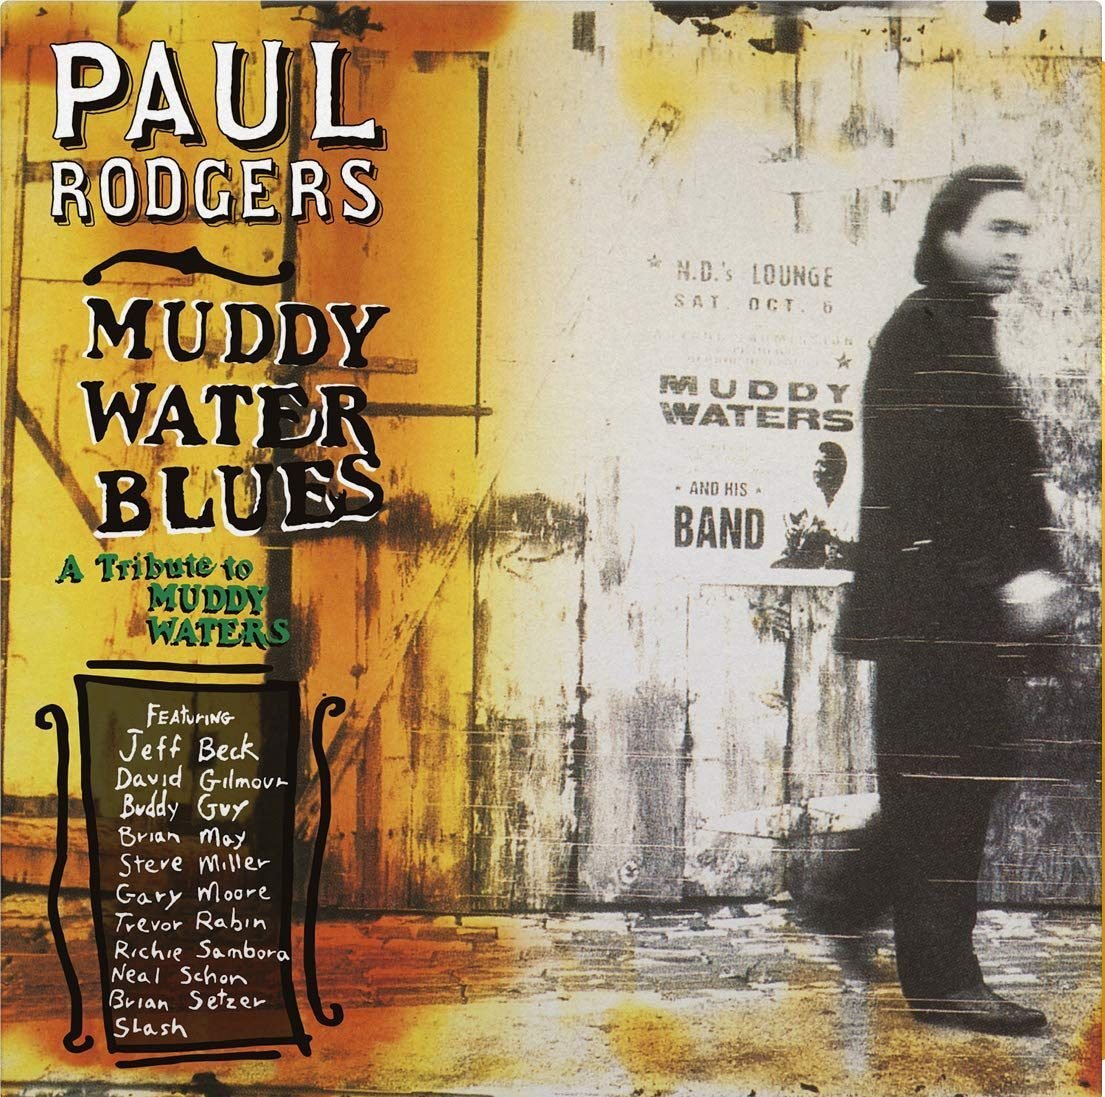 PAUL RODGERS (FREE/BAD COMPANY) - MUDDY WATER BLUES (1993) - 2LP 180GR 2021 NUMBERED COLOURED LTD EDT SIFIR PLAK